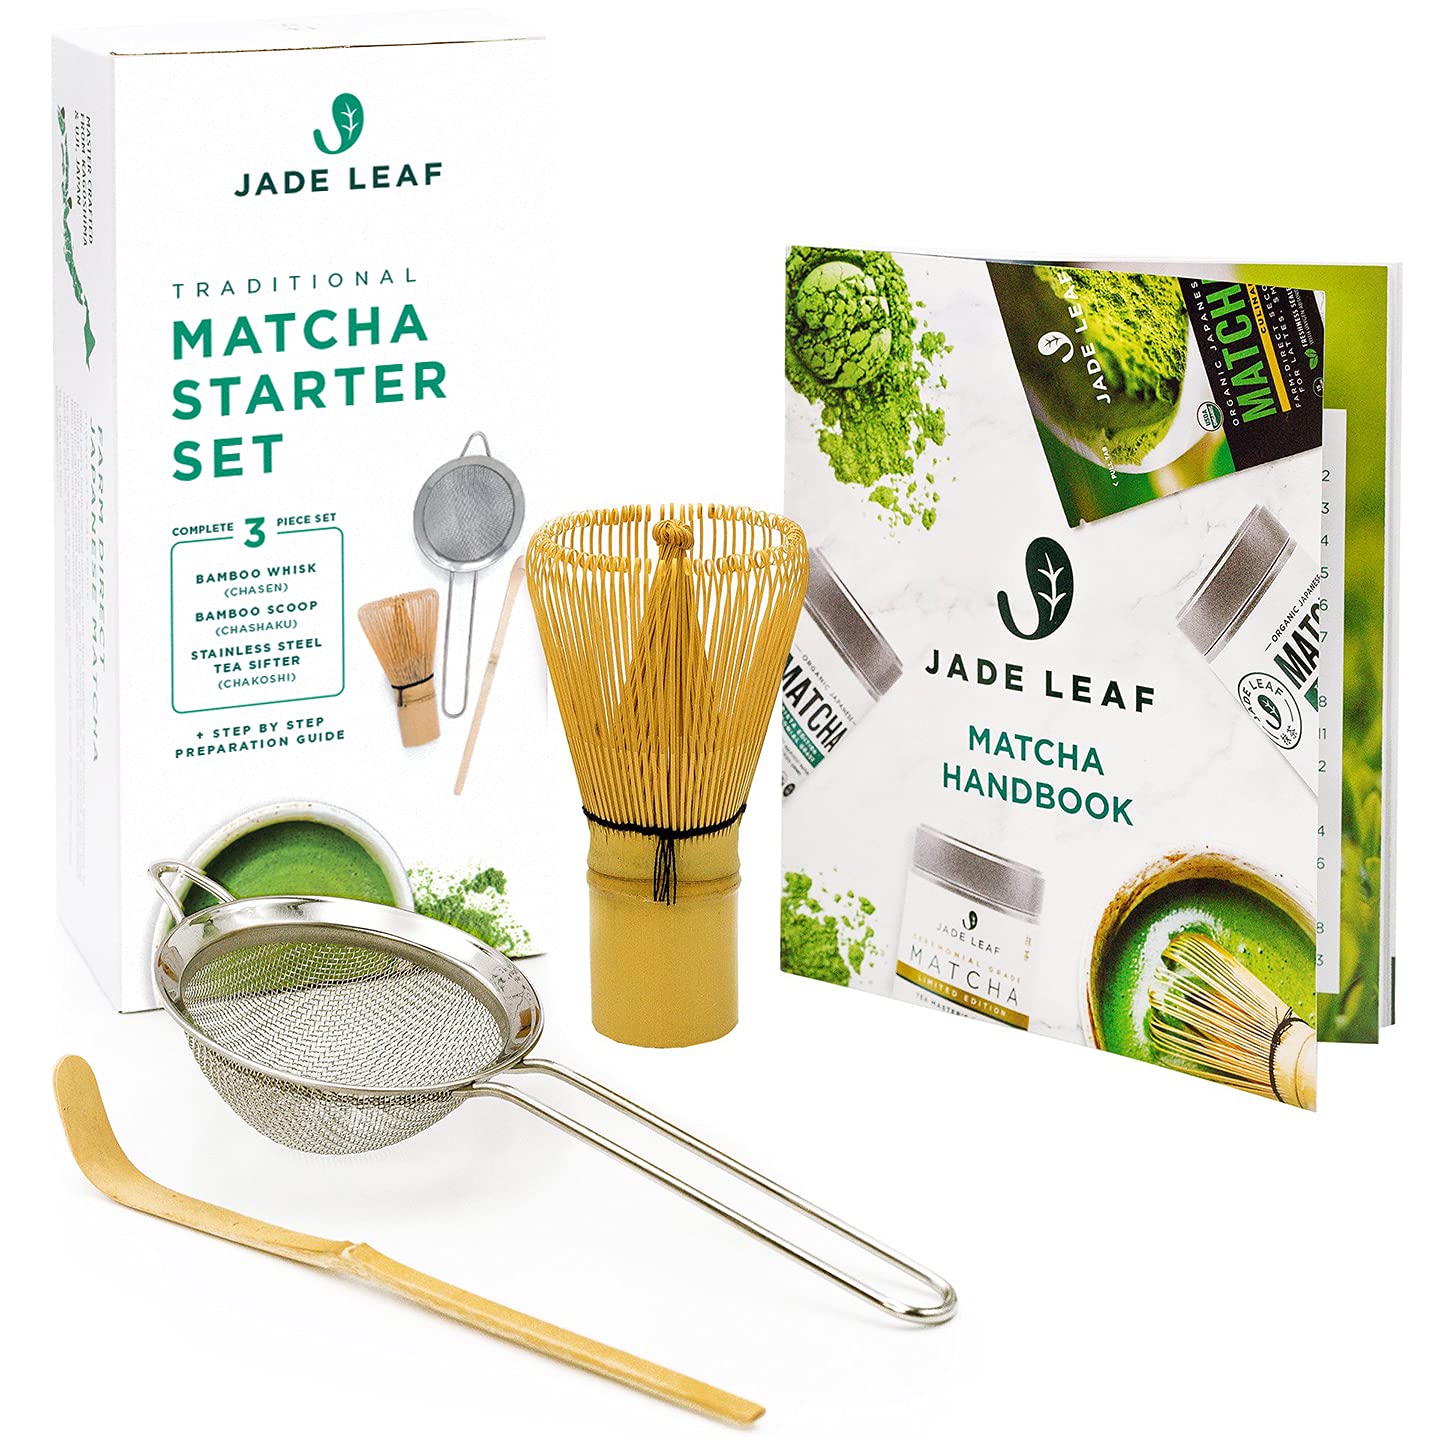 Book Cover Jade Leaf Traditional Matcha Starter Set - Bamboo Matcha Whisk (Chasen), Scoop (Chashaku), Stainless Steel Sifter, Fully Printed Handbook - Japanese Tea Set Traditional Starter Set